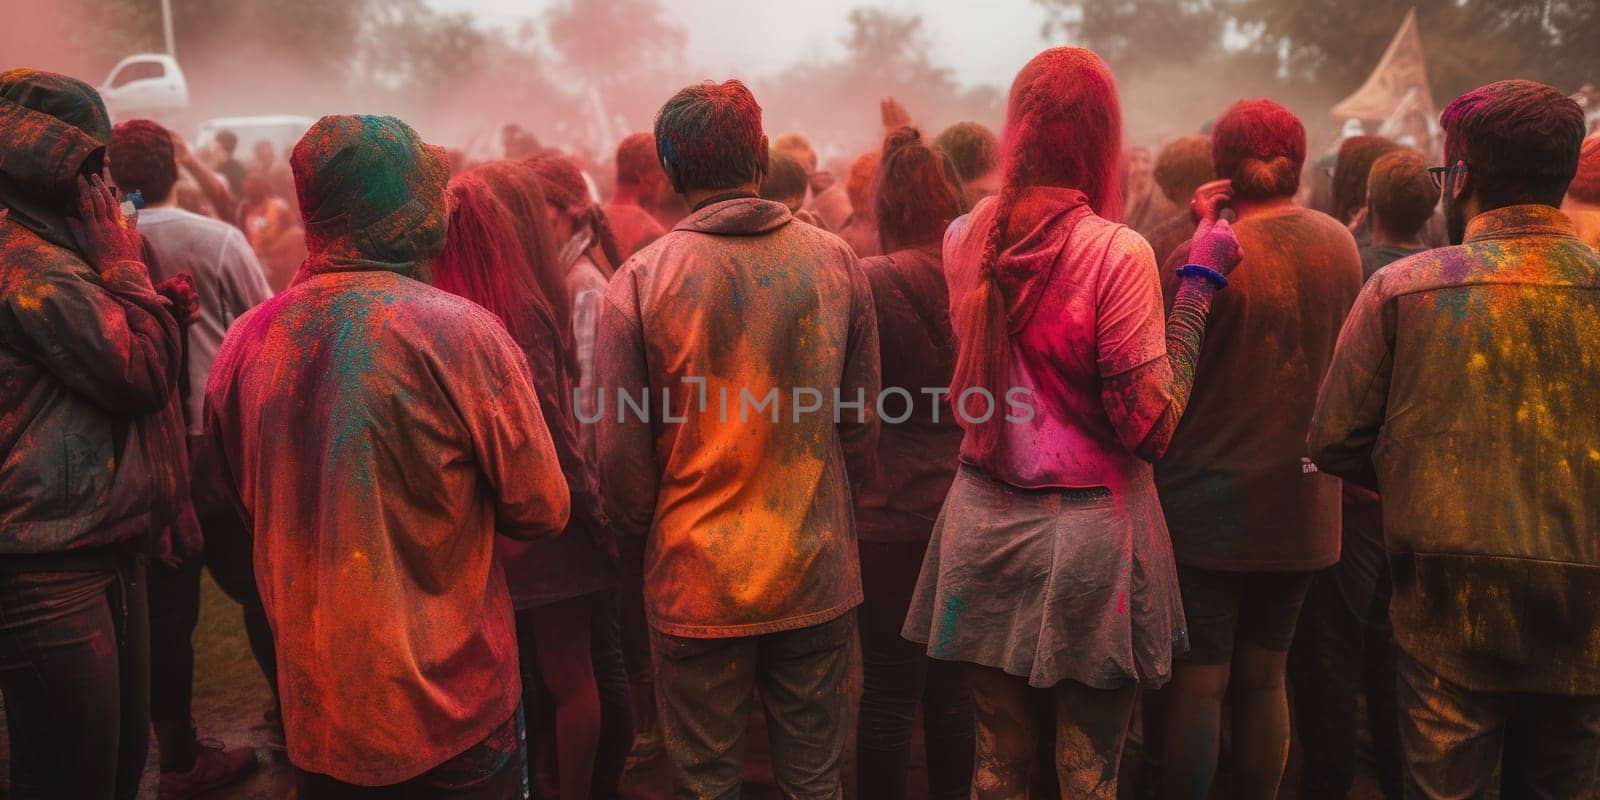 Crowd Of People Celebrating Holy Holiday With Colorful Powder Paints by tan4ikk1